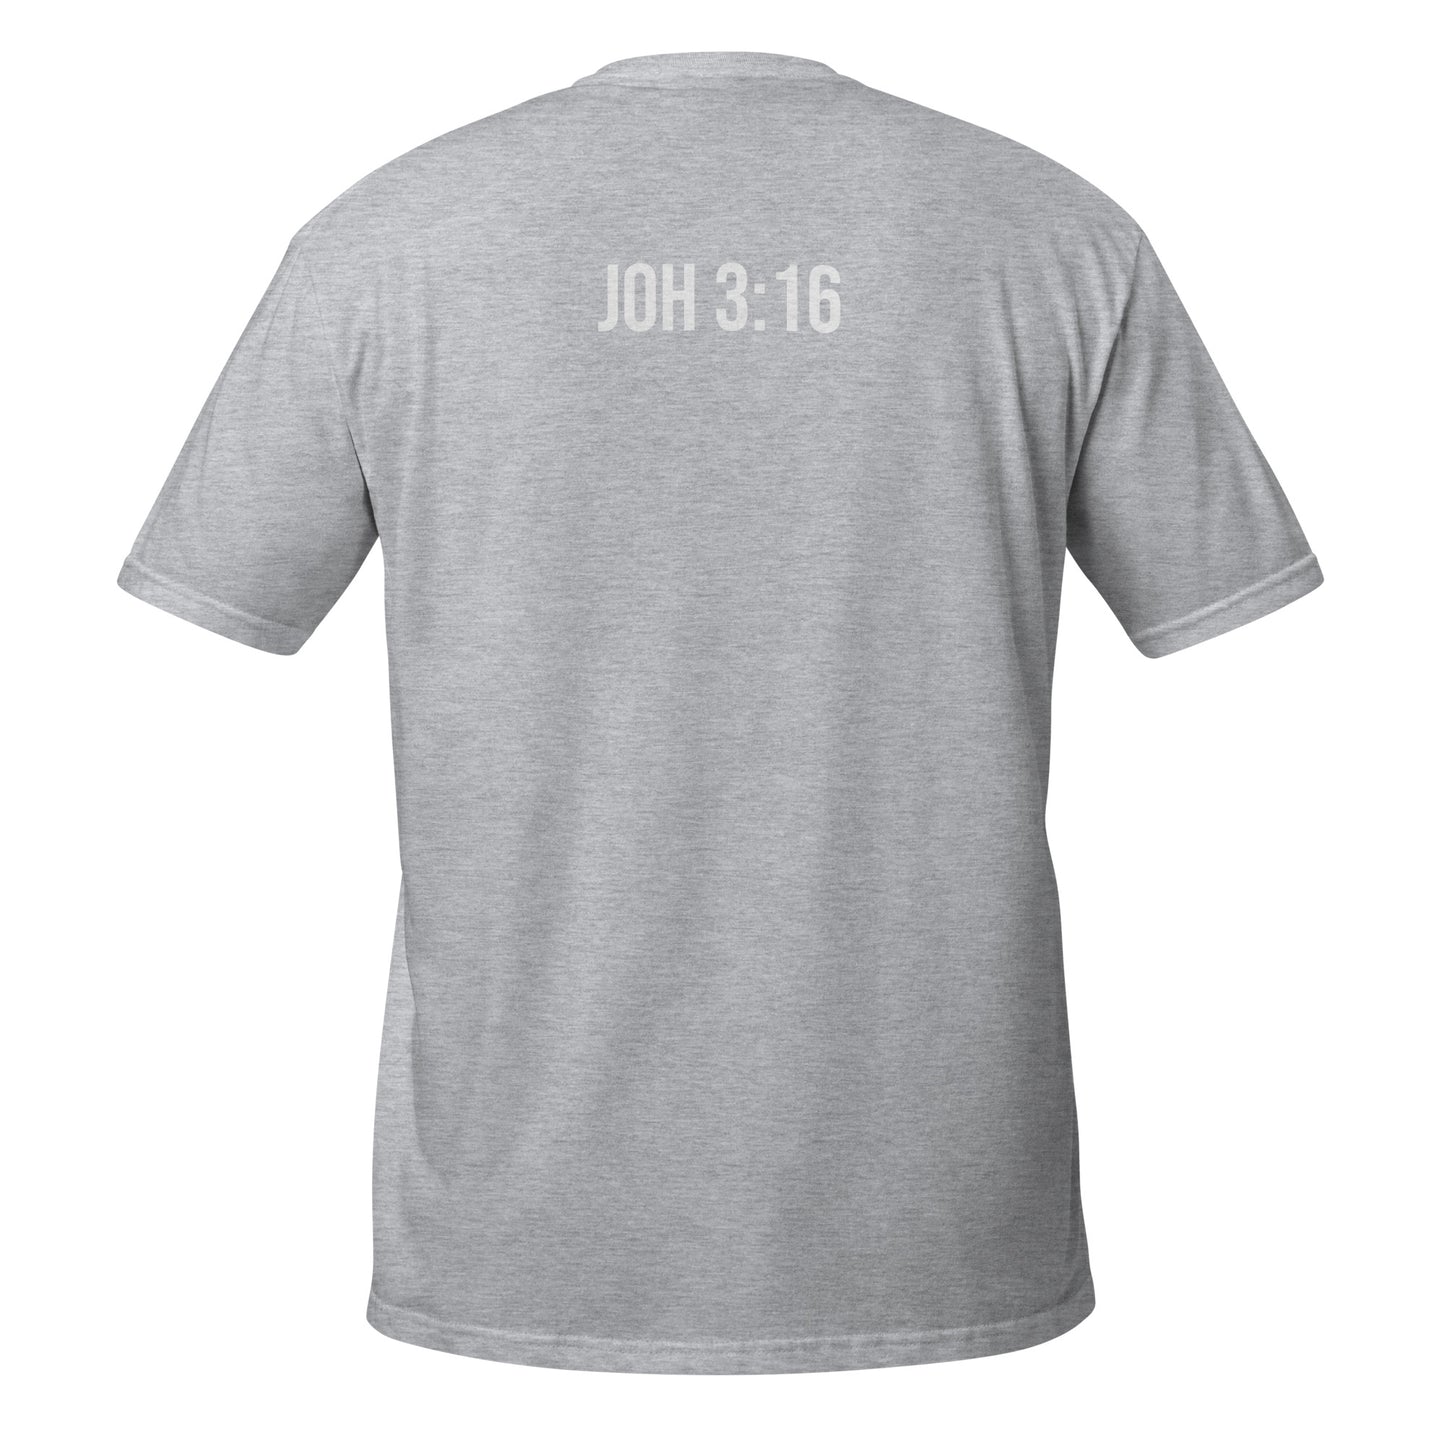 "JOH 3:16" unisex t-shirt with back print